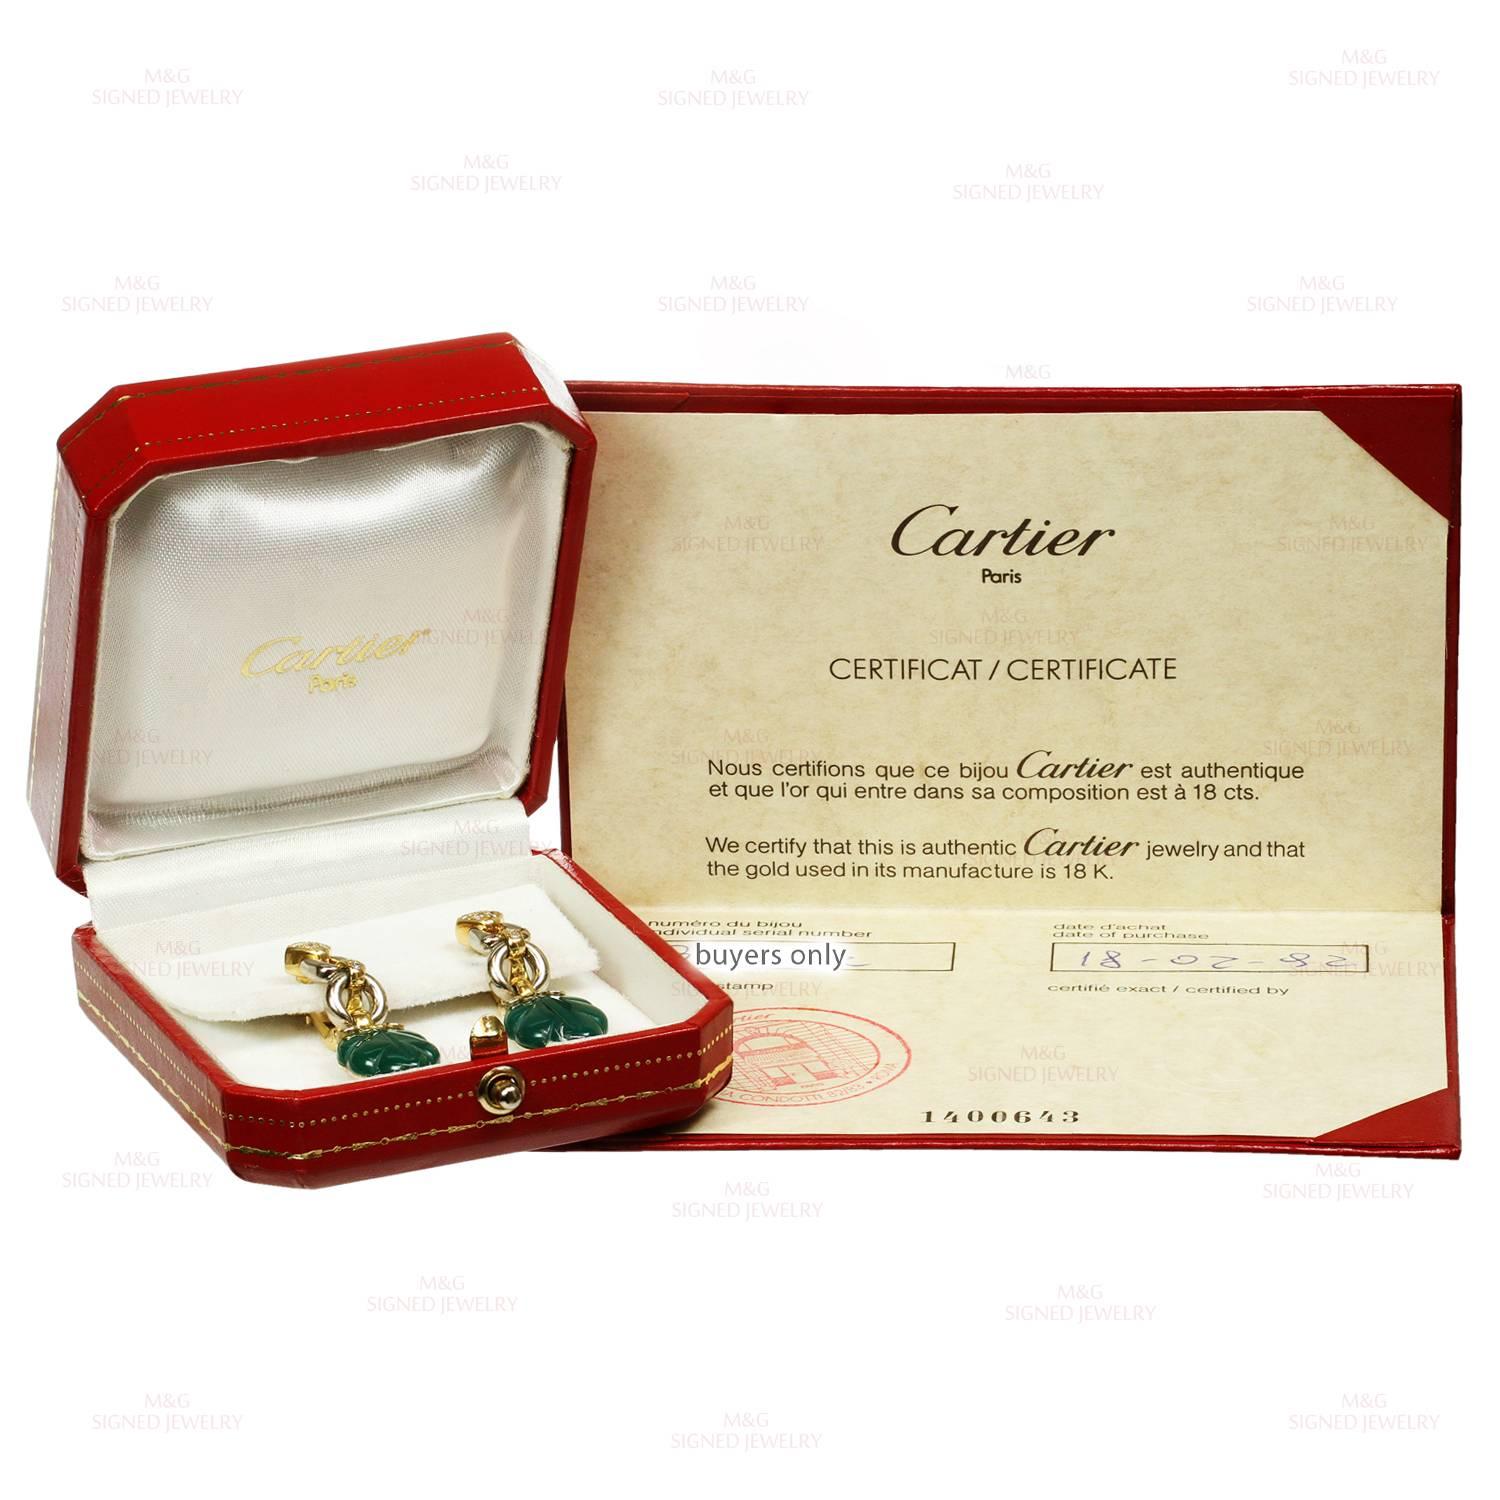 These fabulous Cartier earrings are crafted in 18k yellow & white gold and feature beautifully carved green onyx leafs accented with sparkling brilliant-cut round diamonds. Made in France circa 1990. Measurements: 0.51